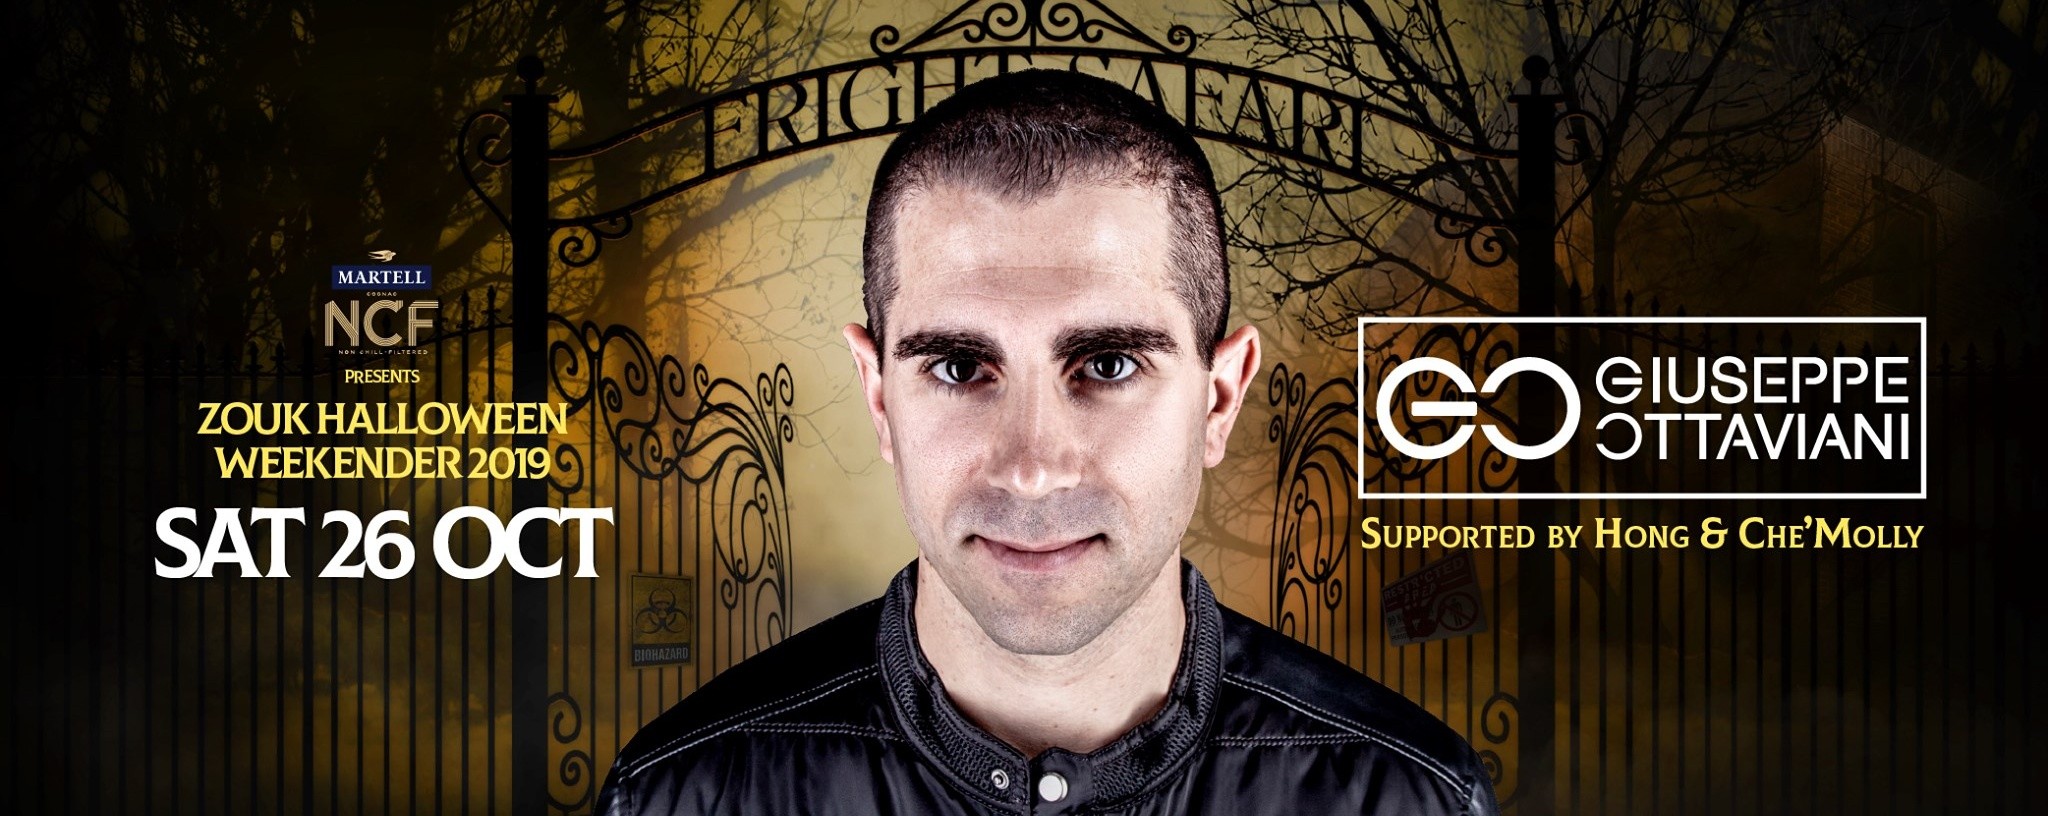 MARTELL NCF PRESENTS FRIGHT SAFARI WITH GIUSEPPE OTTAVIANI, SUPPORTED BY HONG & CHE’MOLLY